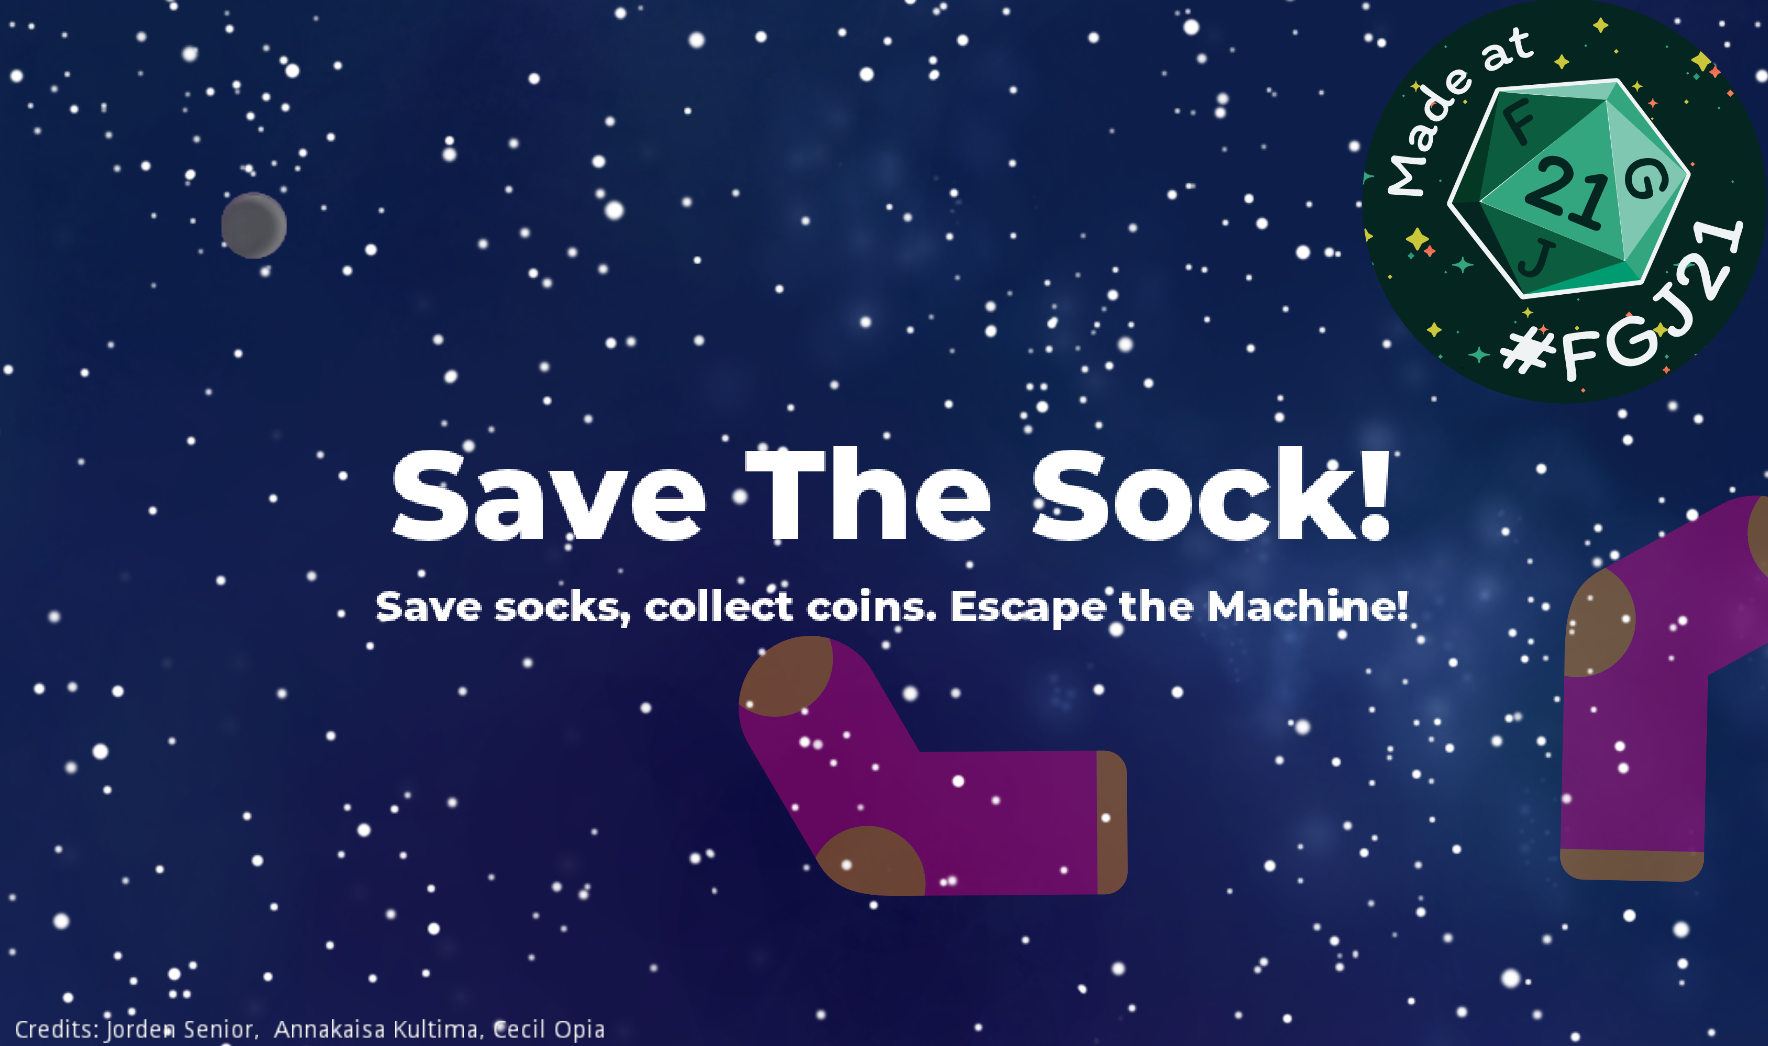 Save the sock!